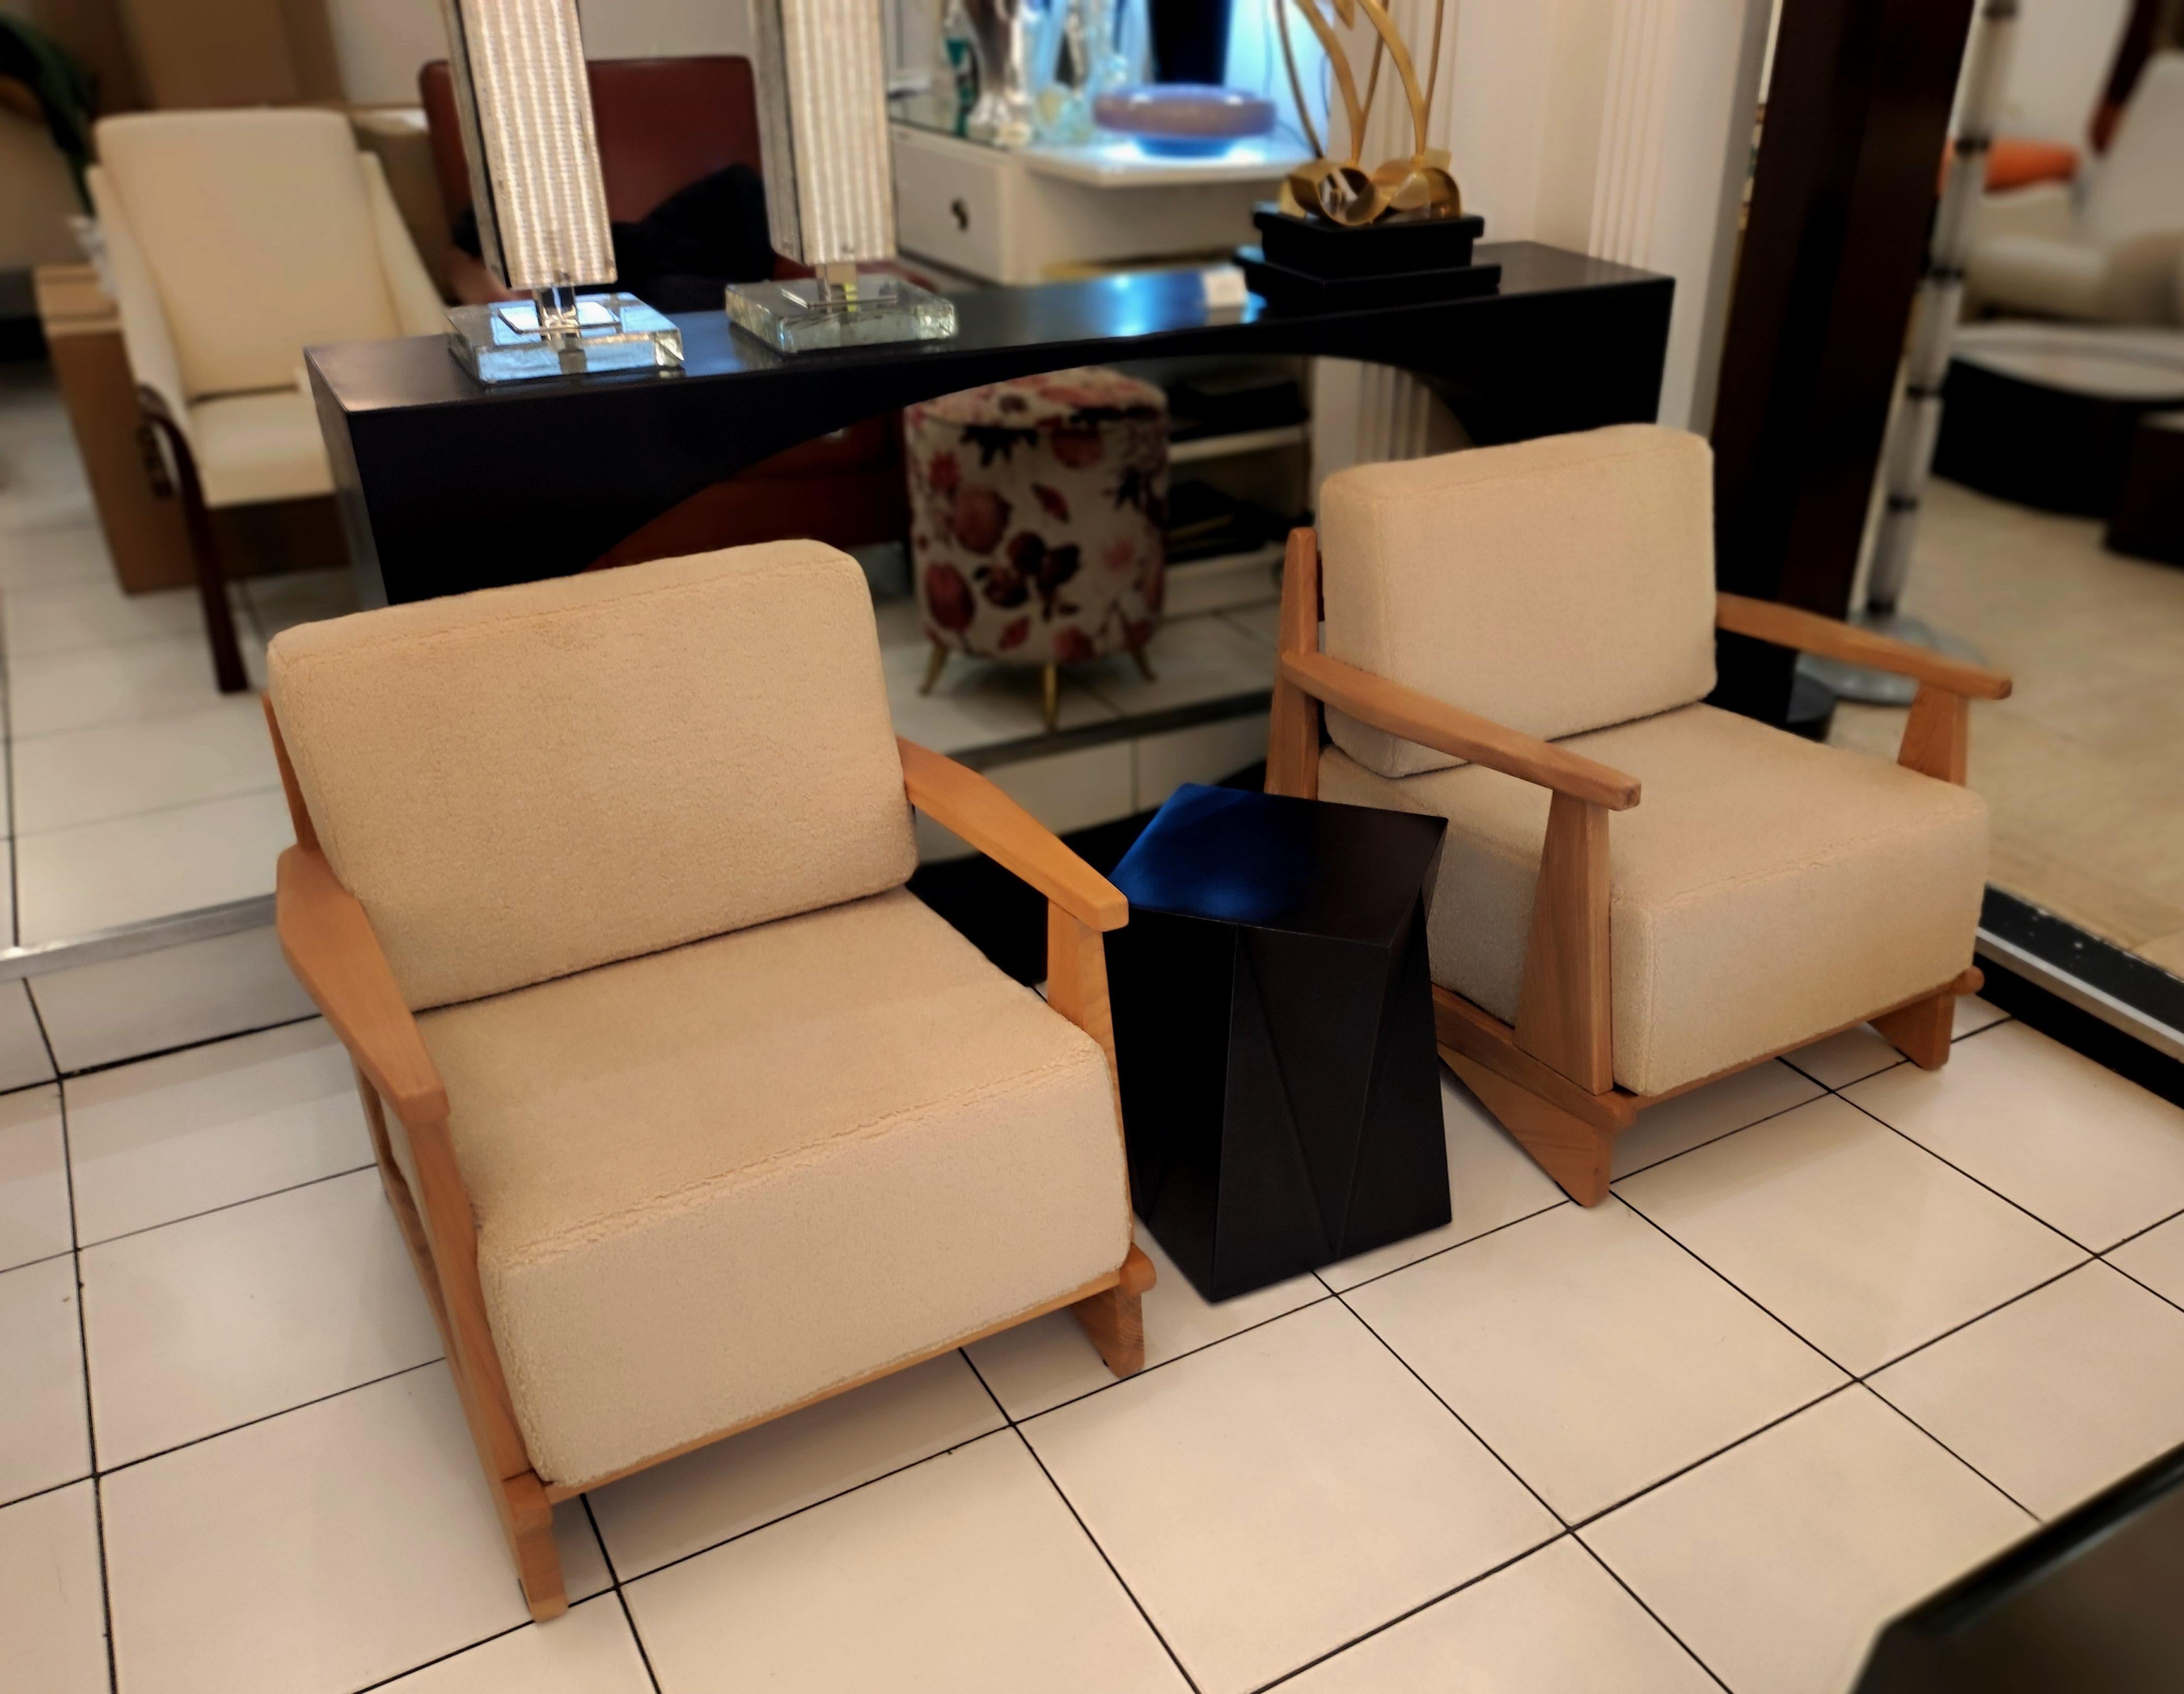 Pair of massive oak wood armchairs, Attb Maison Regain, reupholstered with beige bouclette fabric.